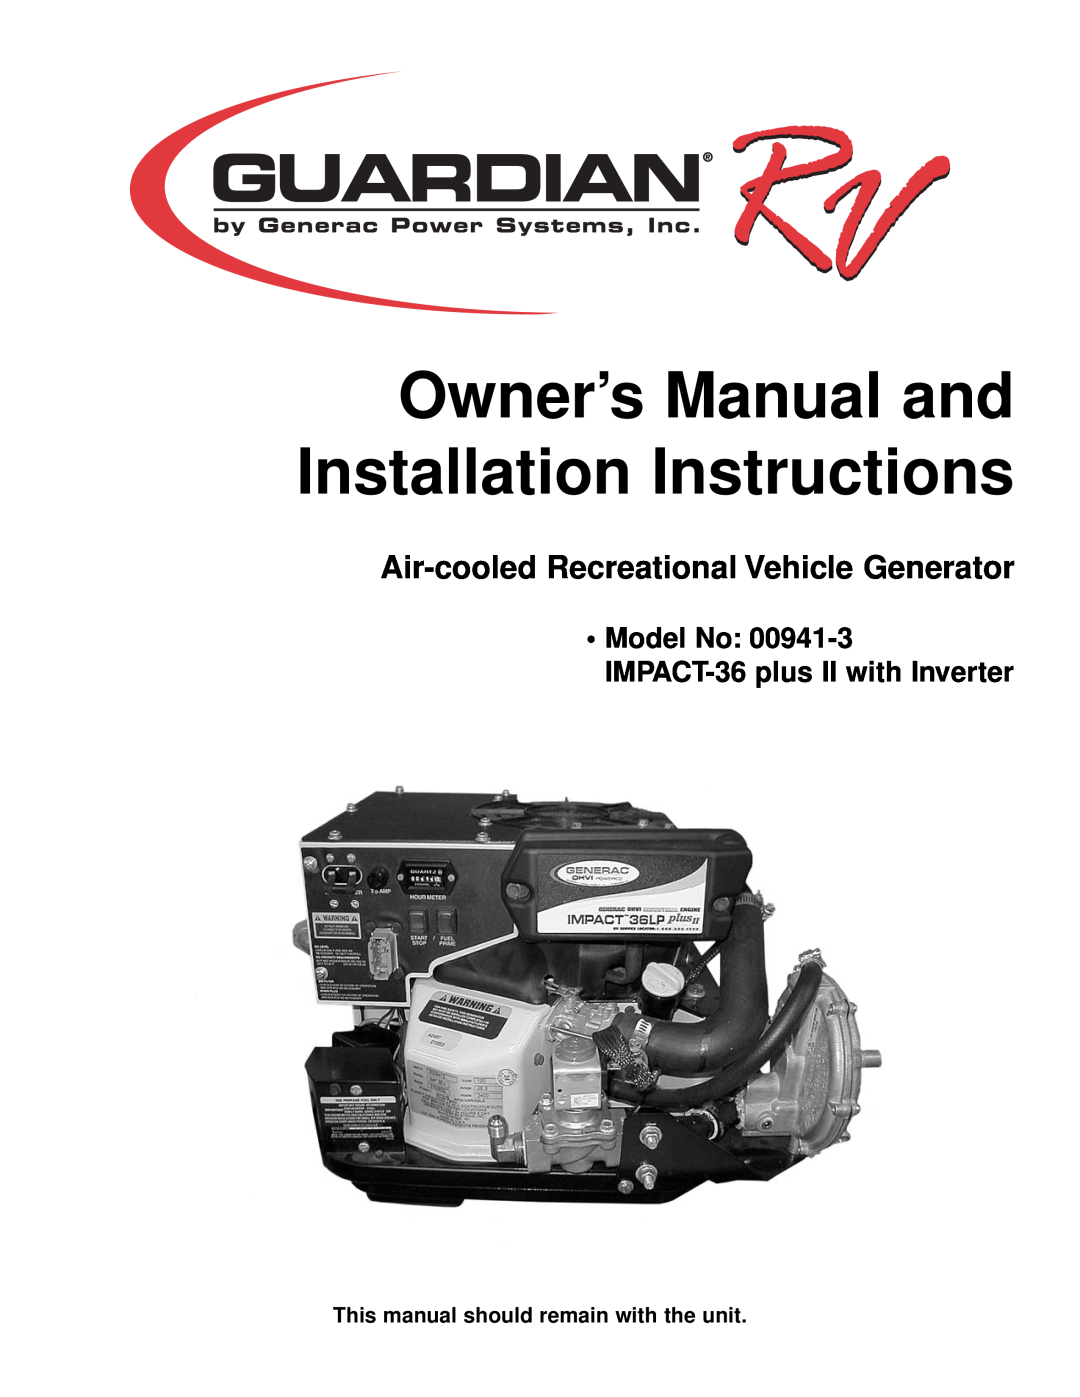 Generac 00941-3 owner manual This manual should remain with the unit, Air-cooledRecreational Vehicle Generator 